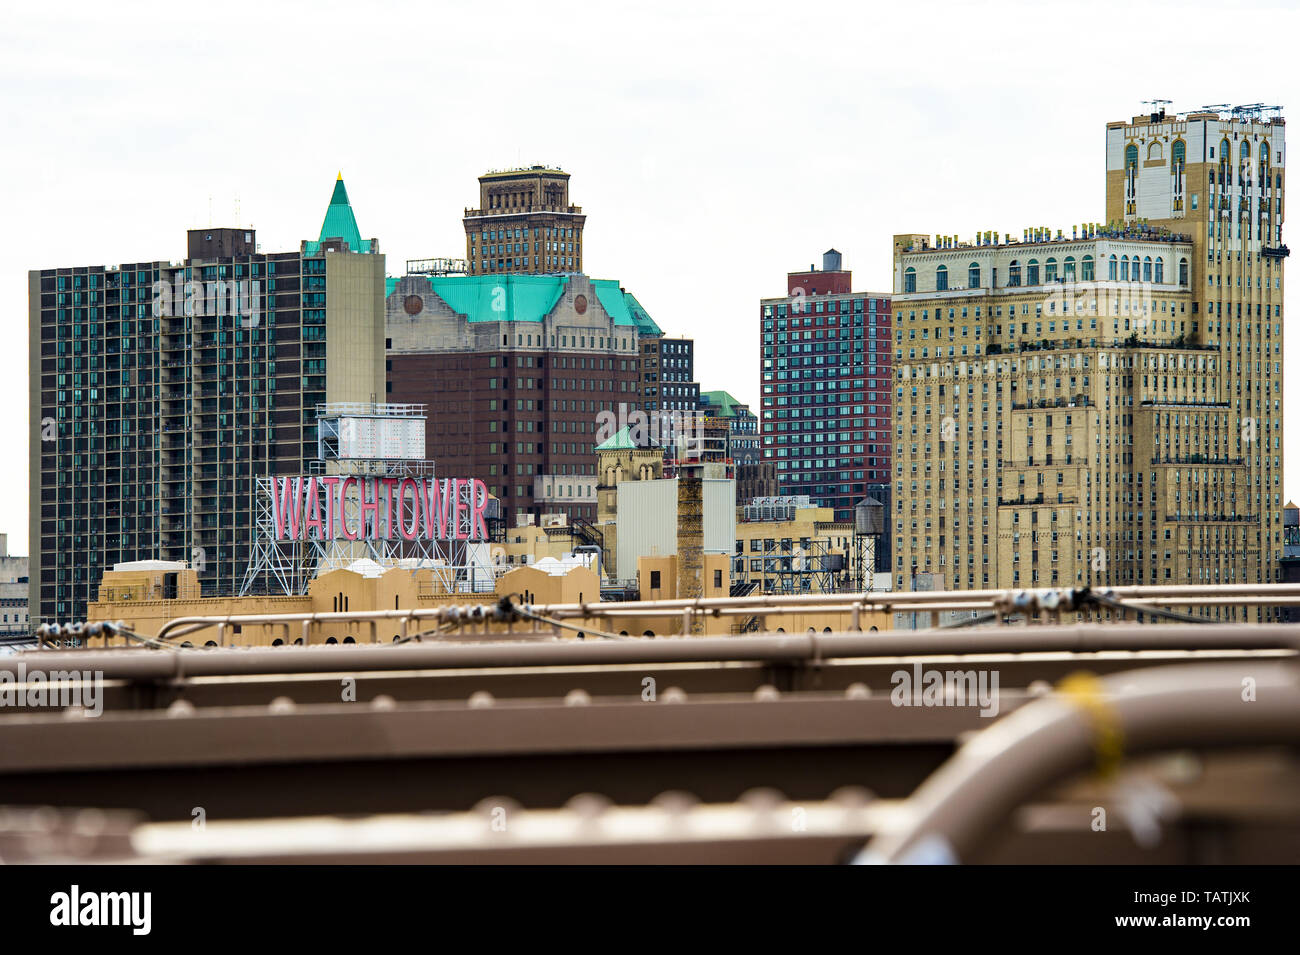 Manhattan skyline with the Watchtower sign seen from the Brooklyn Bridge. Stock Photo